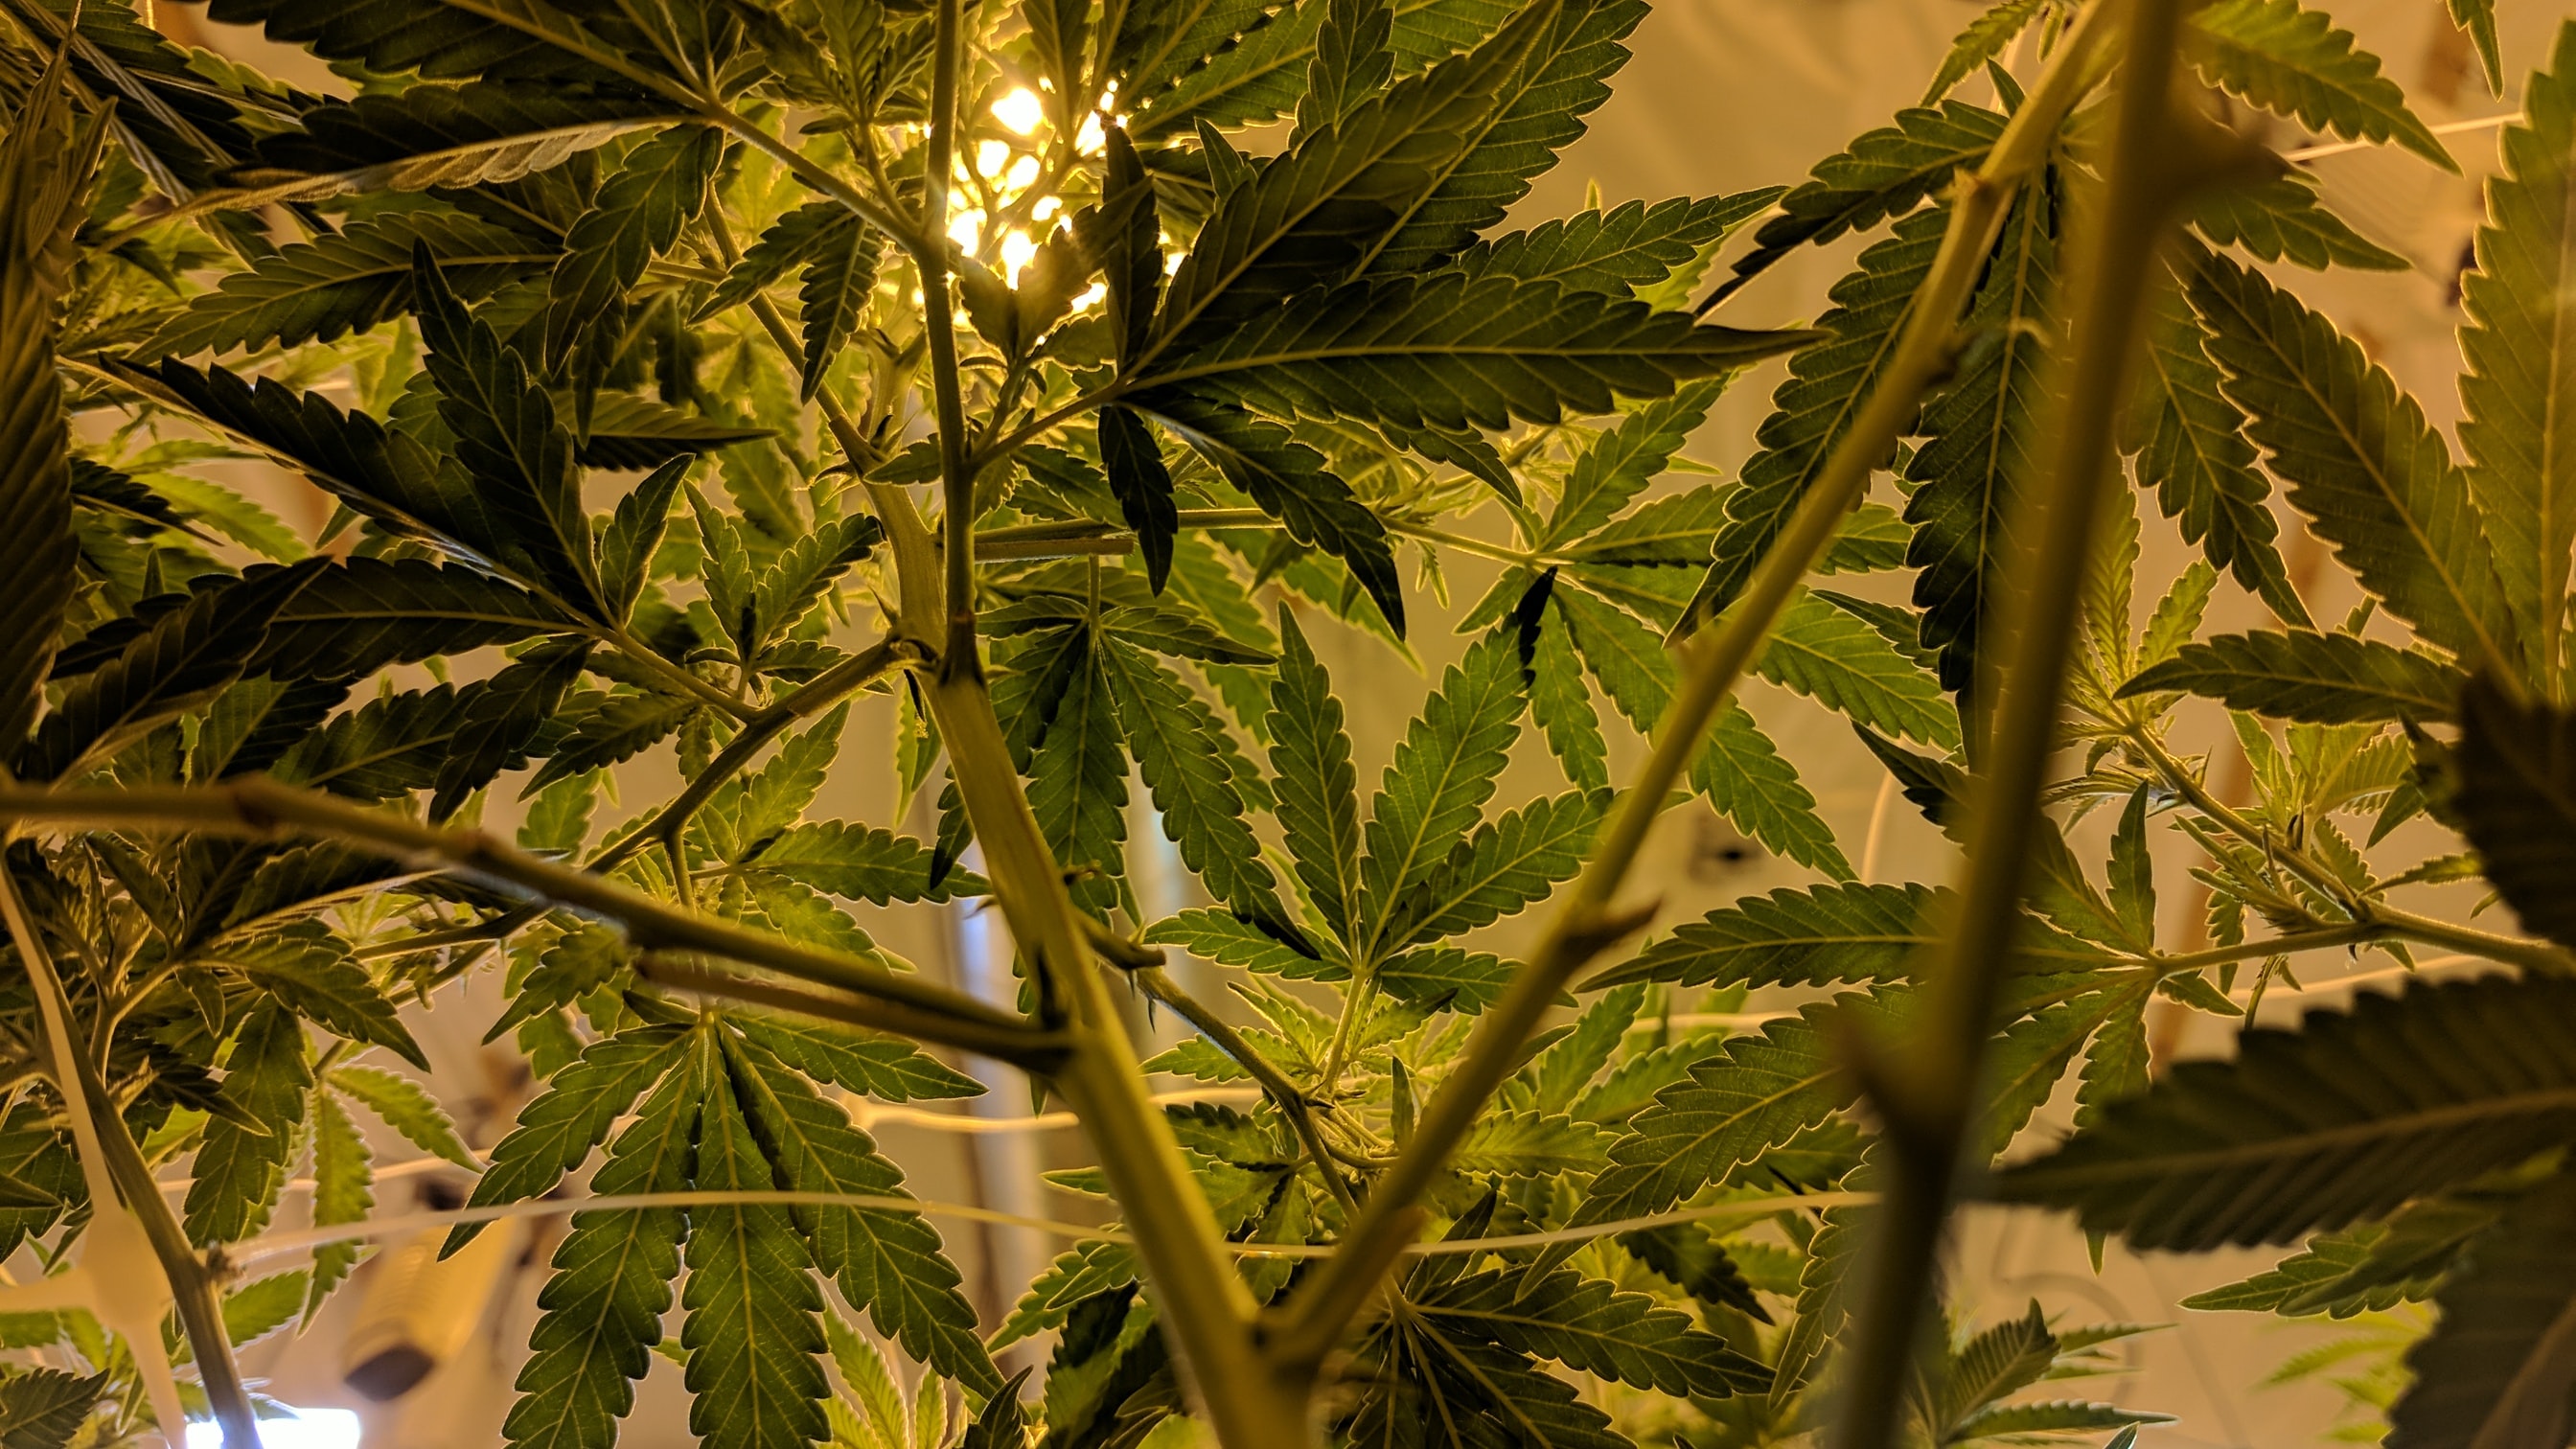 The R & D Group — The risks of owning a former grow-op